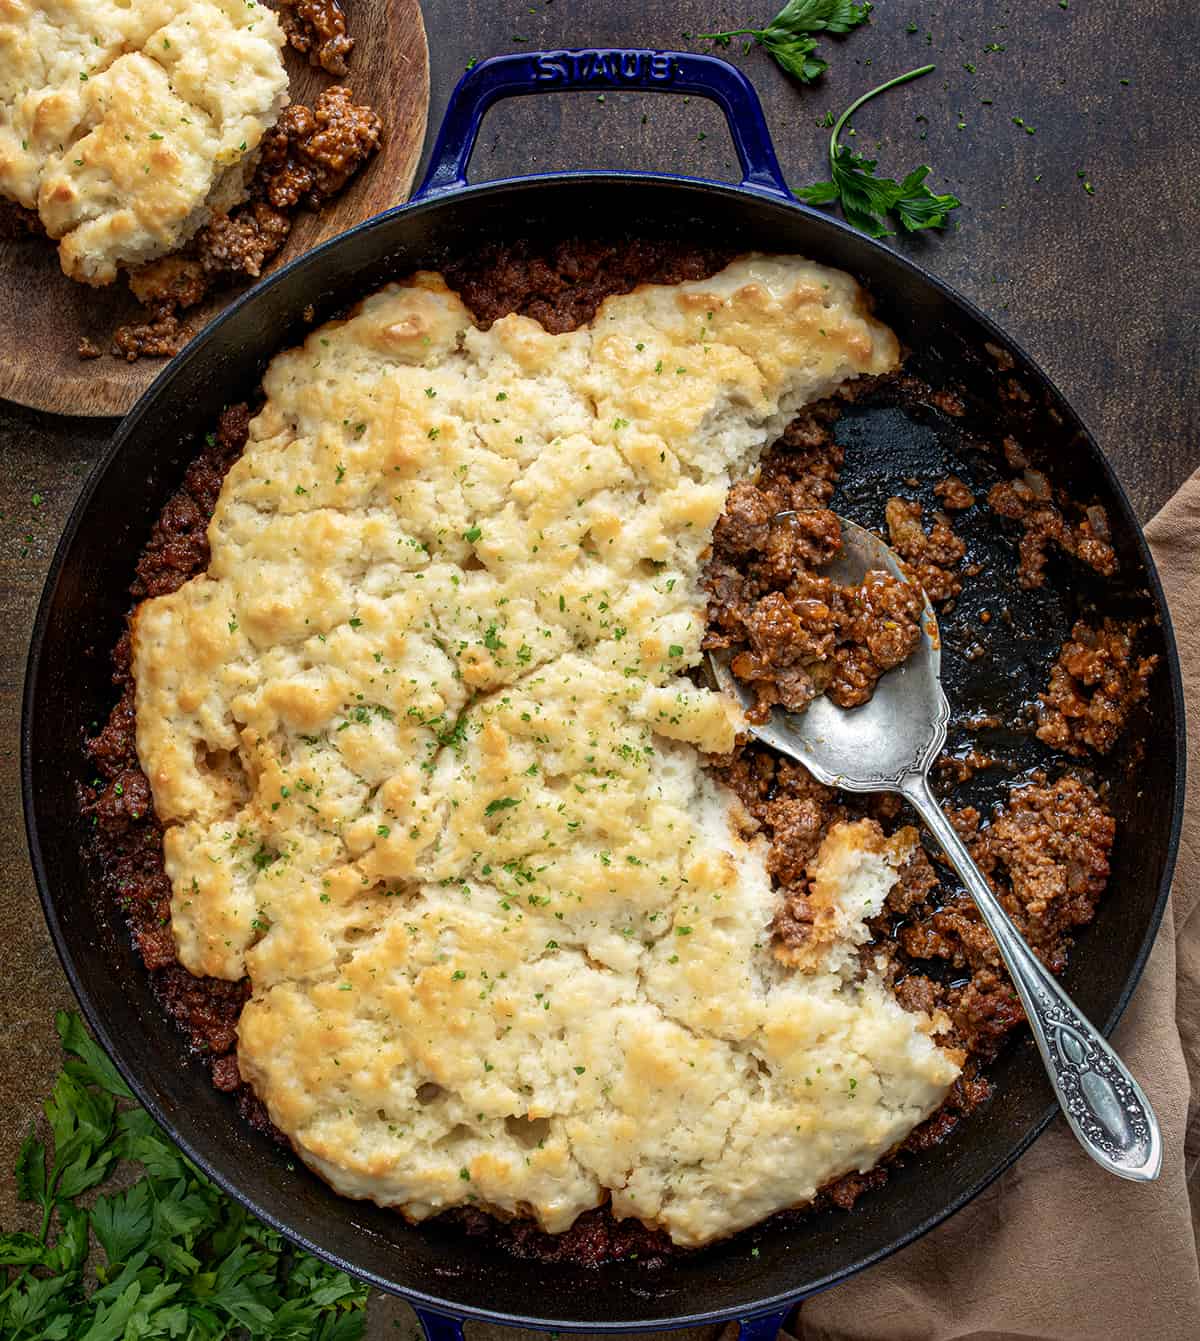 Skillet of Butter Swim Biscuit Sloppy Joe Bake with Some Removed Showing Texture Inside. 